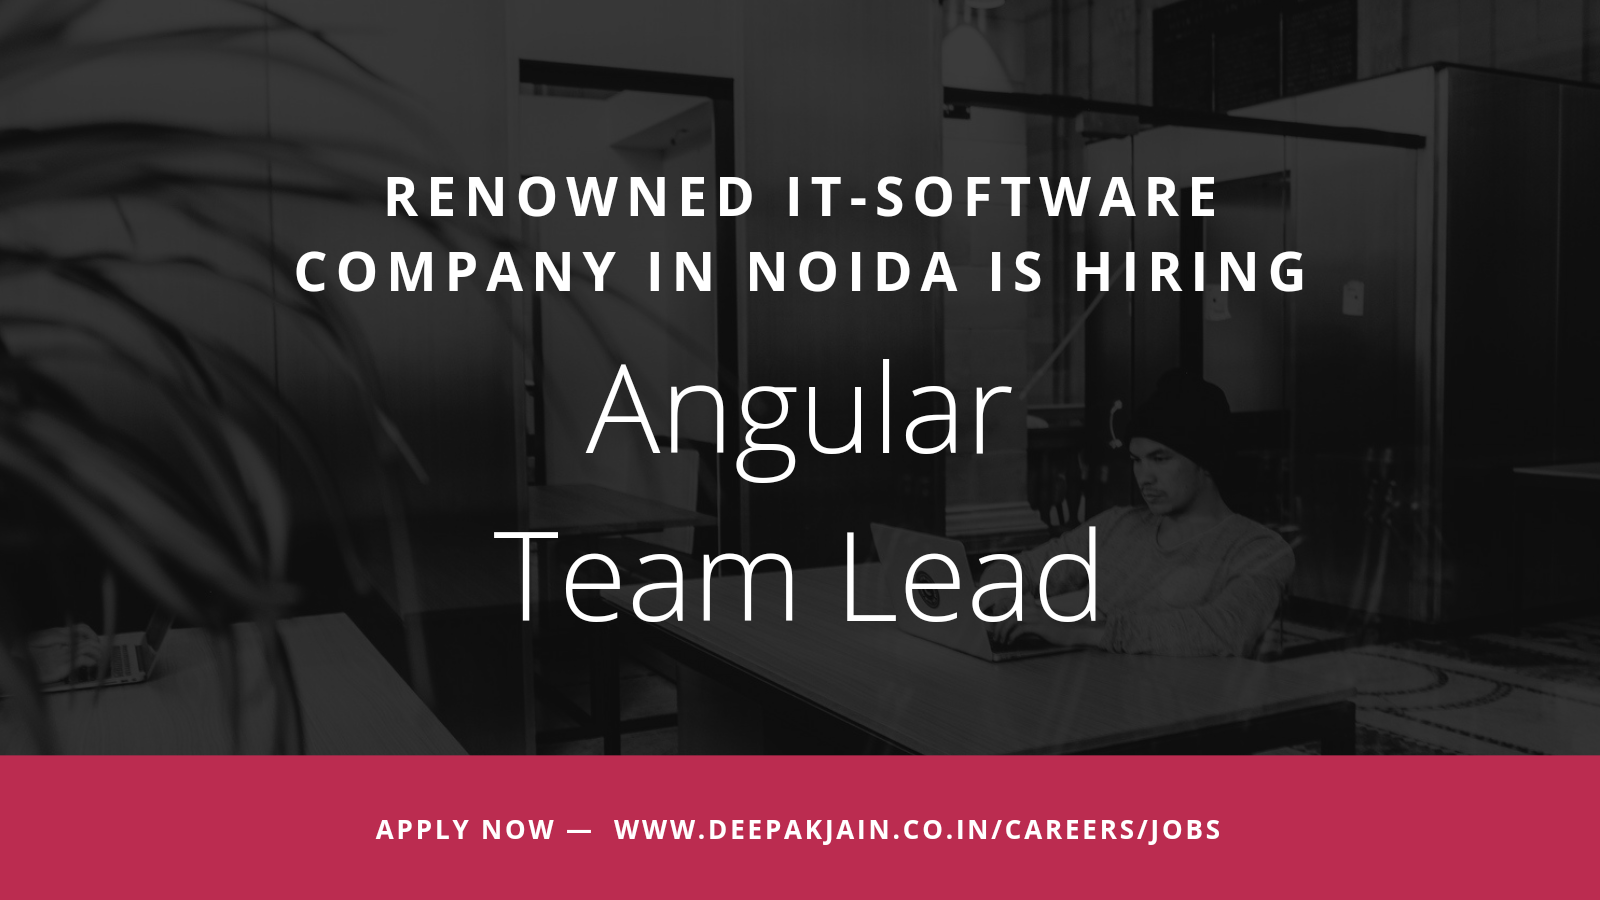 Hiring for Angular Lead role in Noida